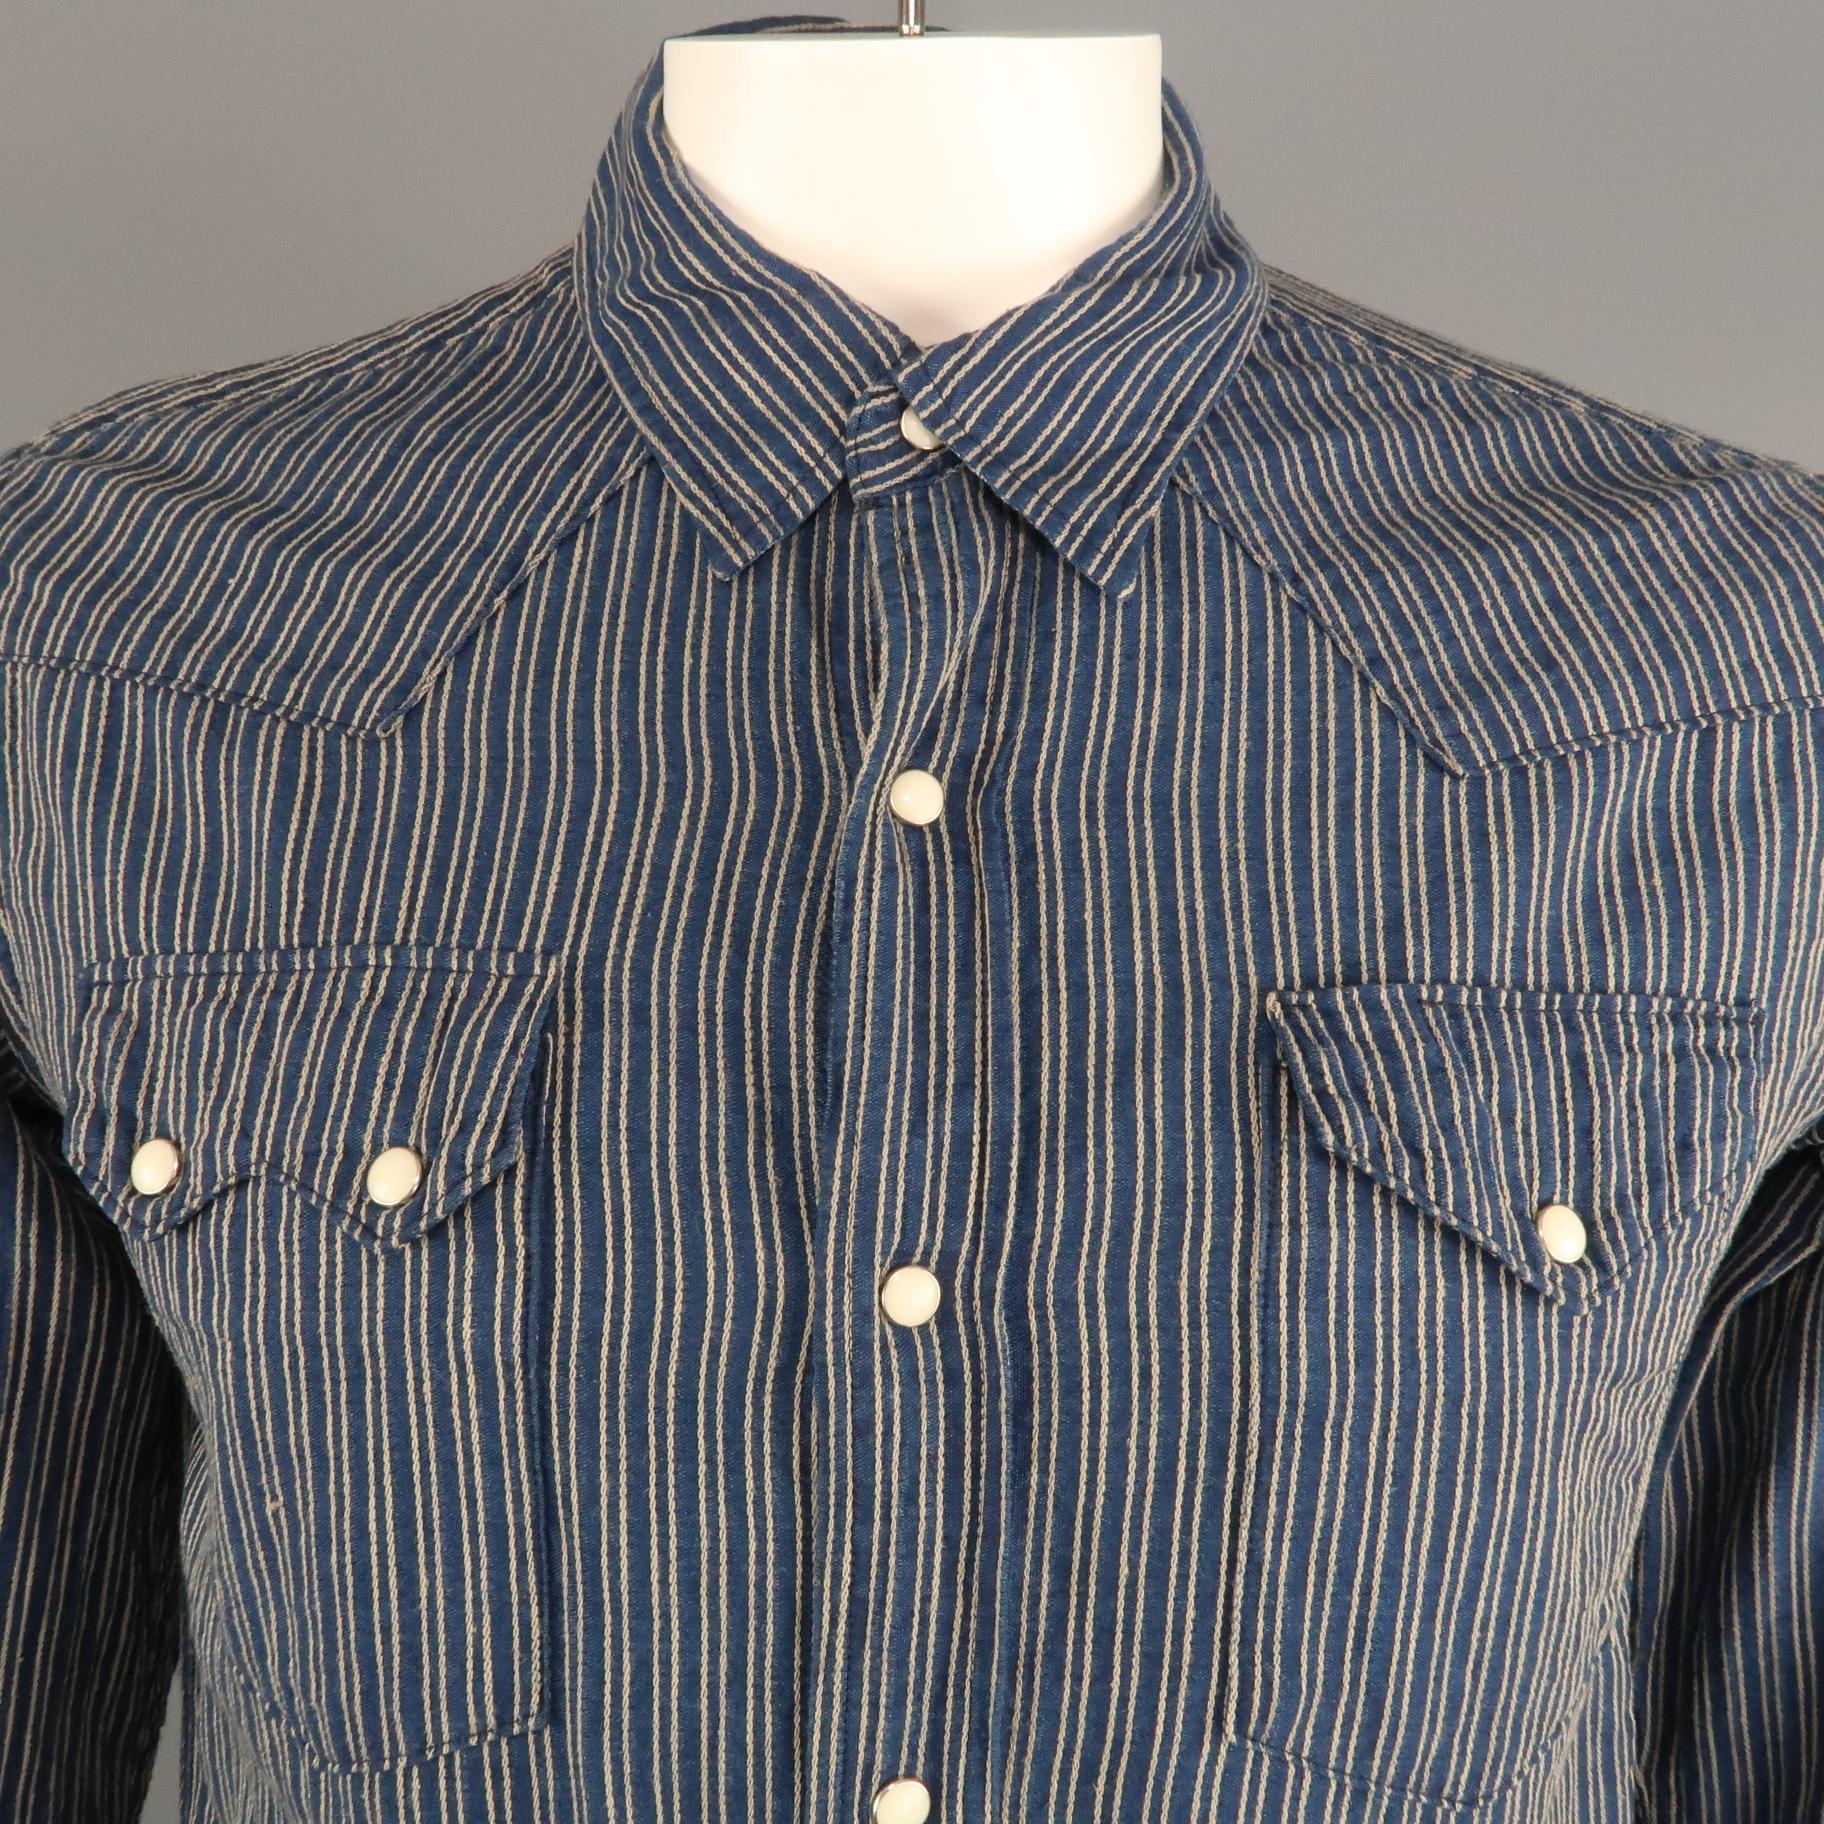 KAPITAL long sleeve shirt comes in a navy and gold striped cotton featuring a button up style, snap closure, and shoulder patch details. Made in Japan.
 
Excellent Pre-Owned Condition.
Marked: JP 3
 
Measurements:
 
Shoulder: 19 in.
Chest: 42